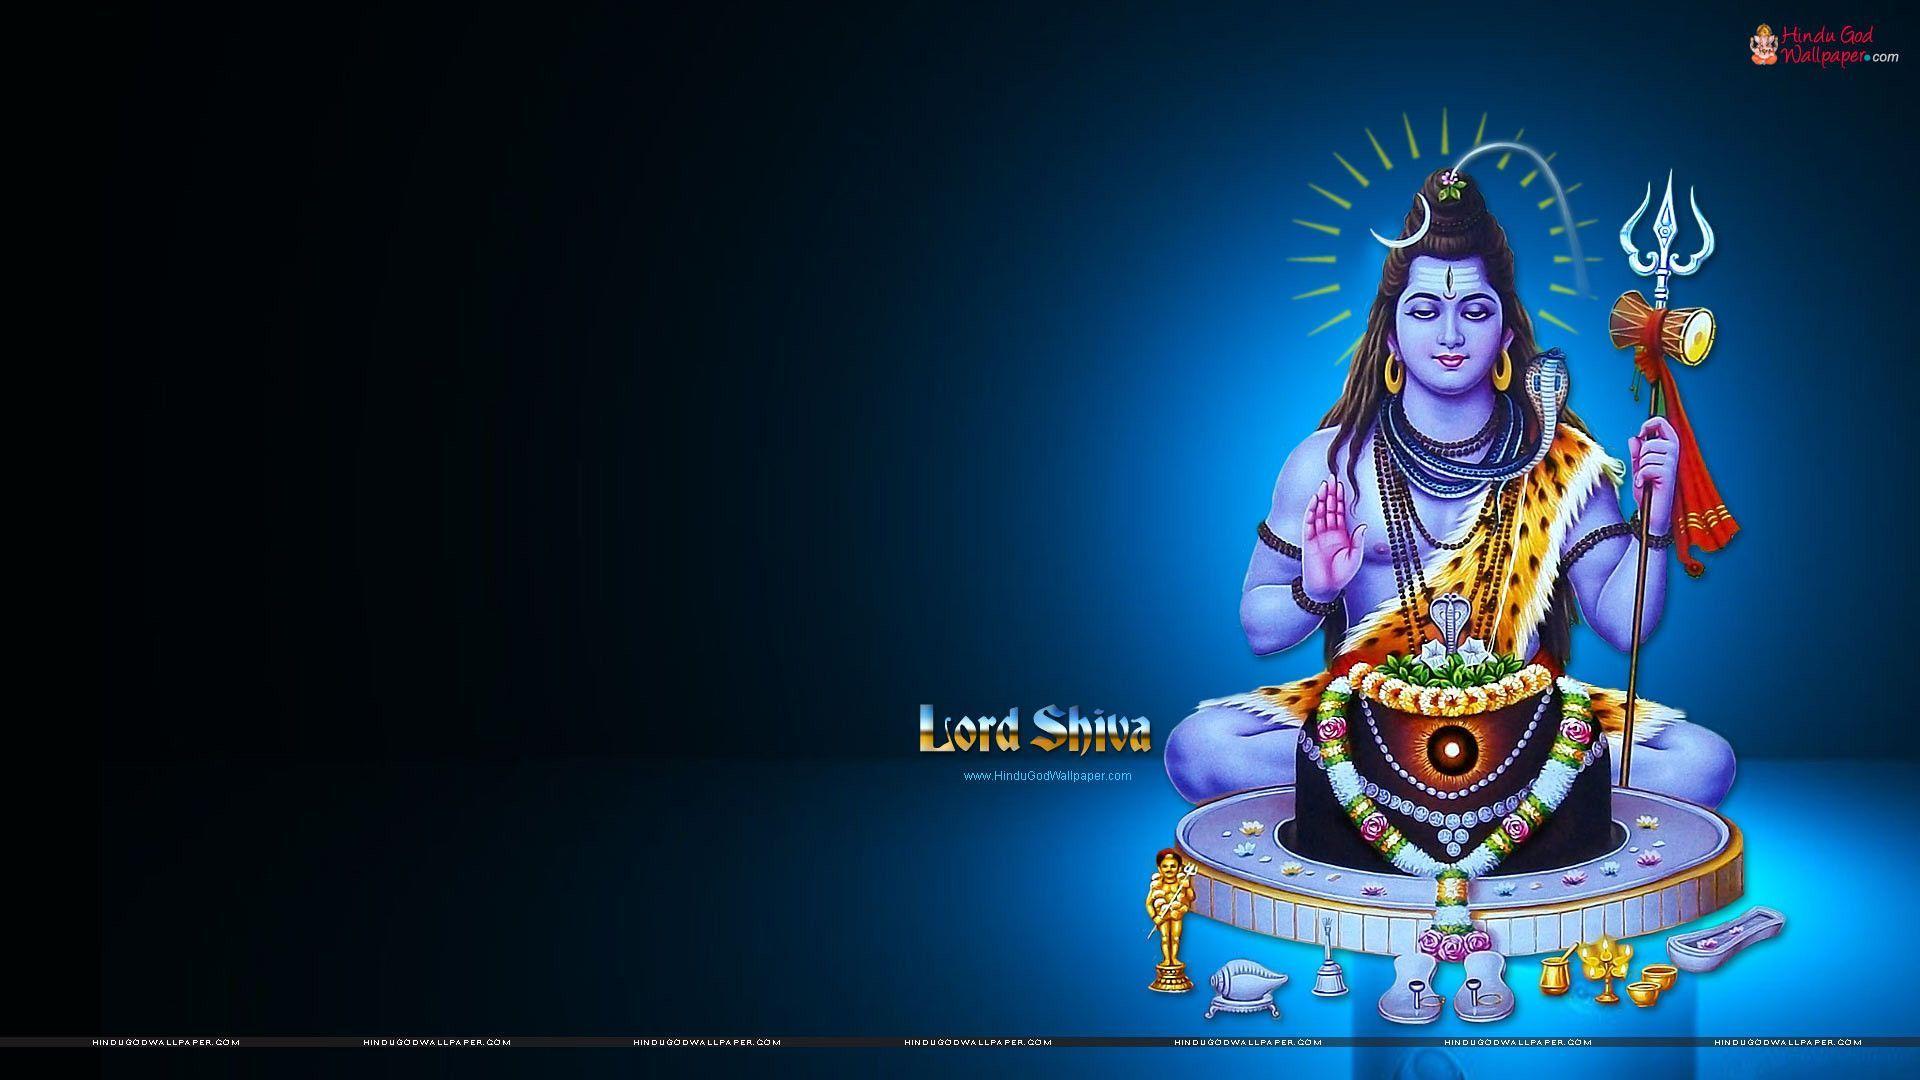 lord shiva still image picture photo wallpaper. Lord